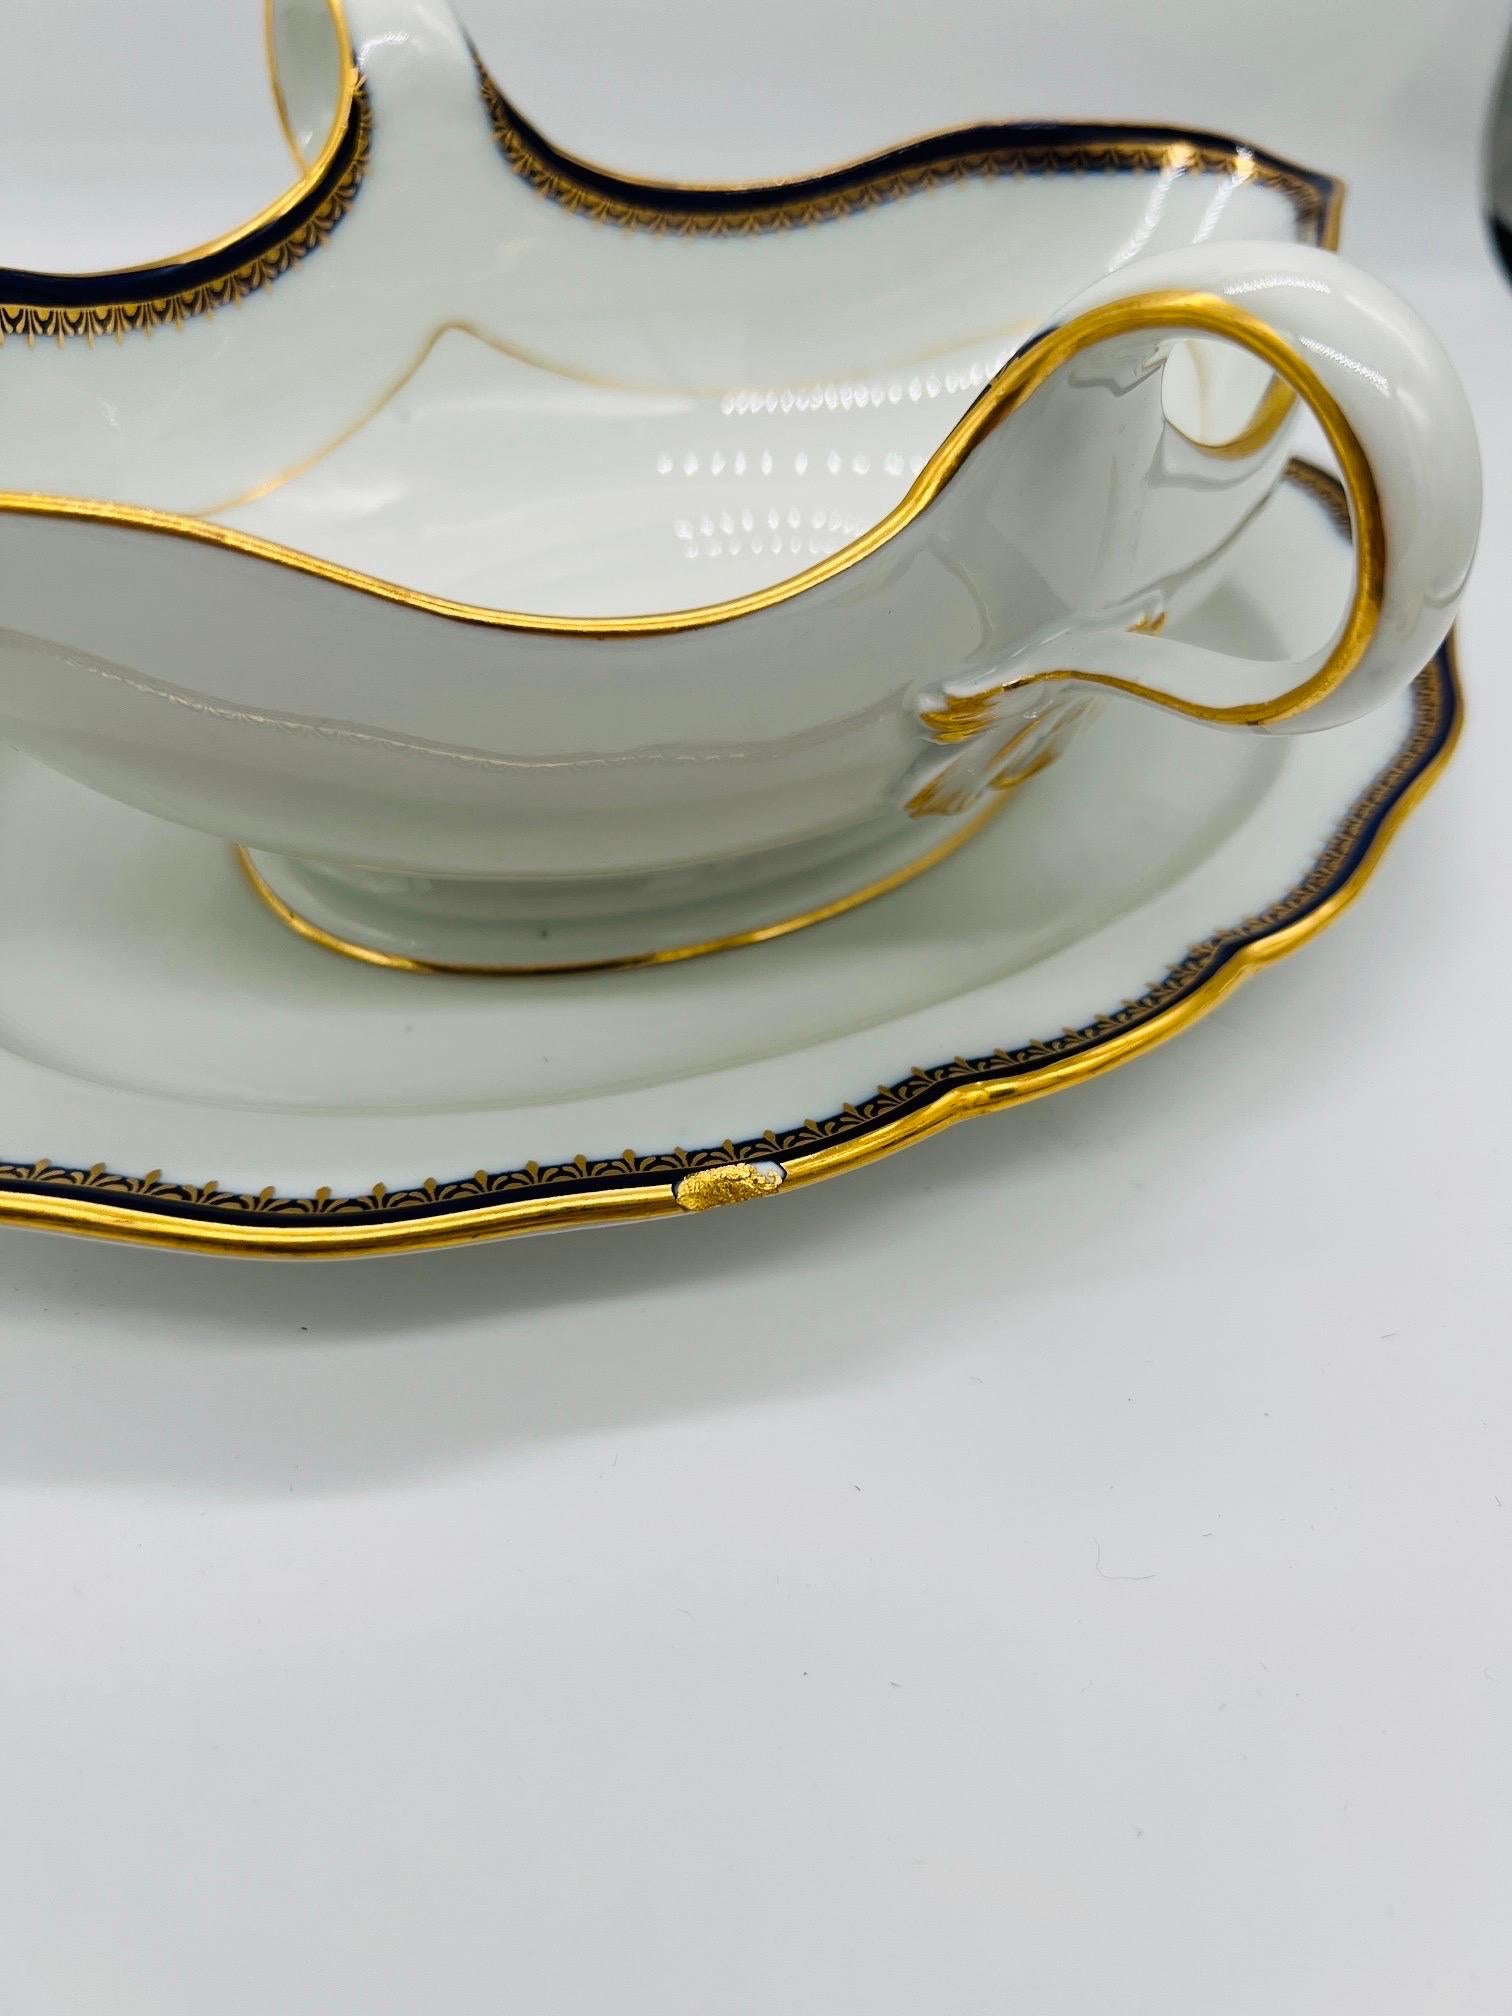 Meissen Porcelain Cobalt & Gold Rim Decorated Sauce Boat with attached under plate. Marked to underside. Please note I have another listing for a matching soup tureen.